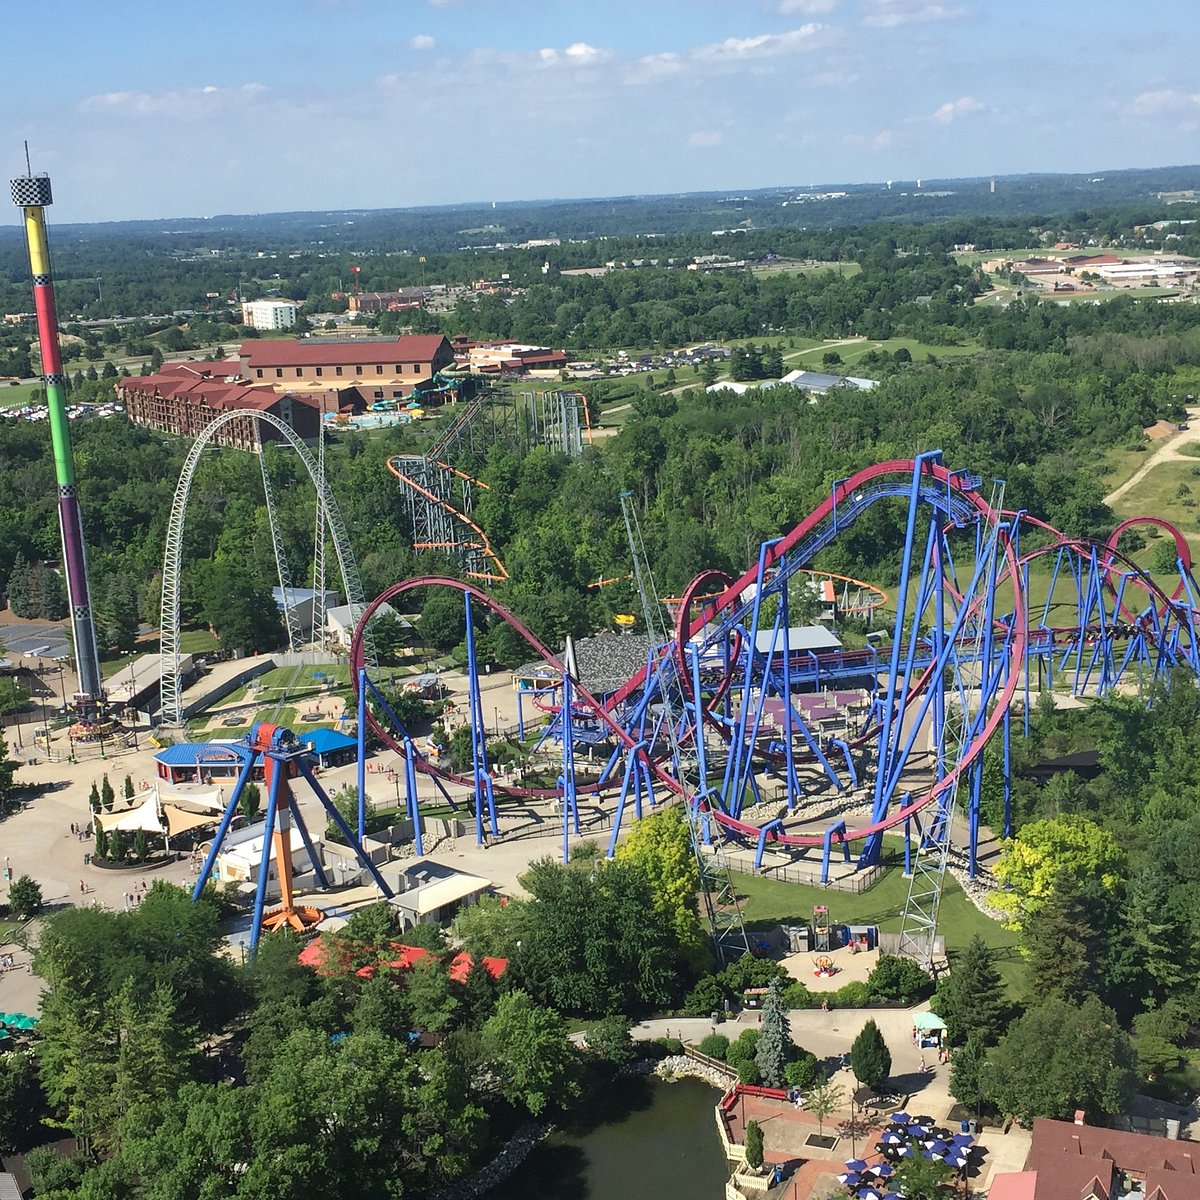 KINGS ISLAND (Mason) All You Need to Know BEFORE You Go